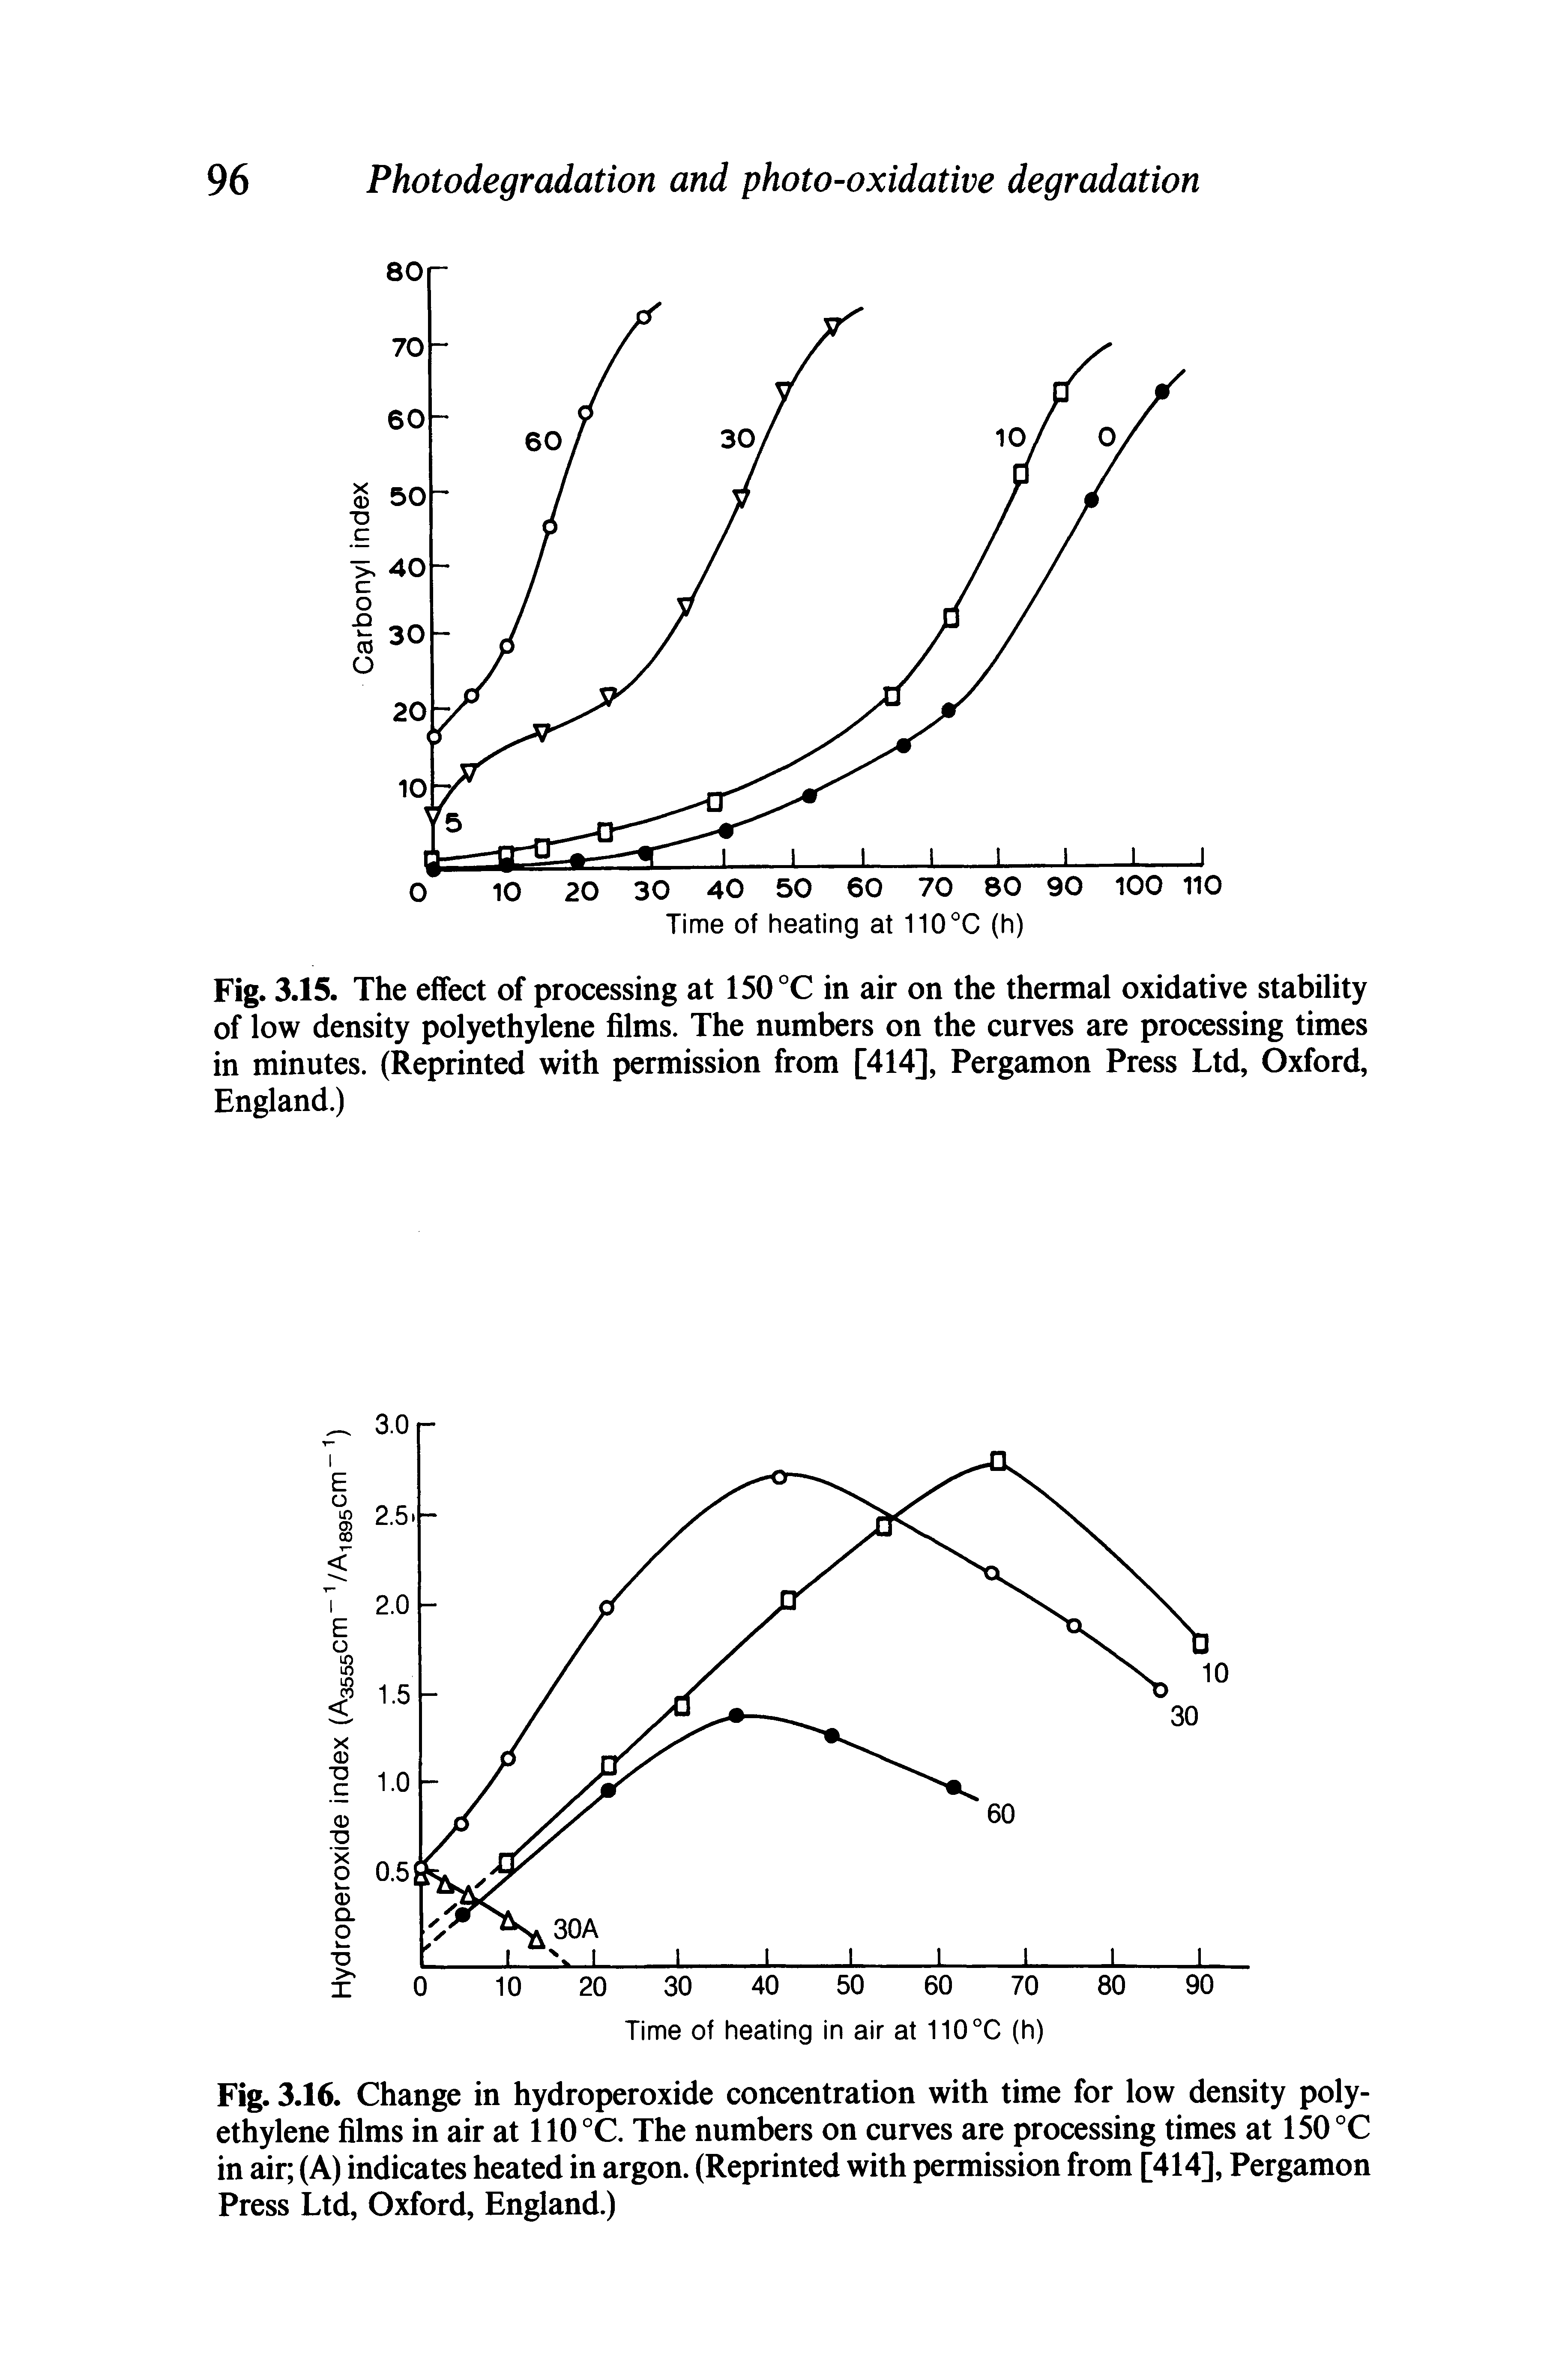 Fig. 3.15. The effect of processing at 150°C in air on the thermal oxidative stability of low density polyethylene films. The numbers on the curves are processing times in minutes. (Reprinted with permission from [414], Pergamon Press Ltd, Oxford, England.)...